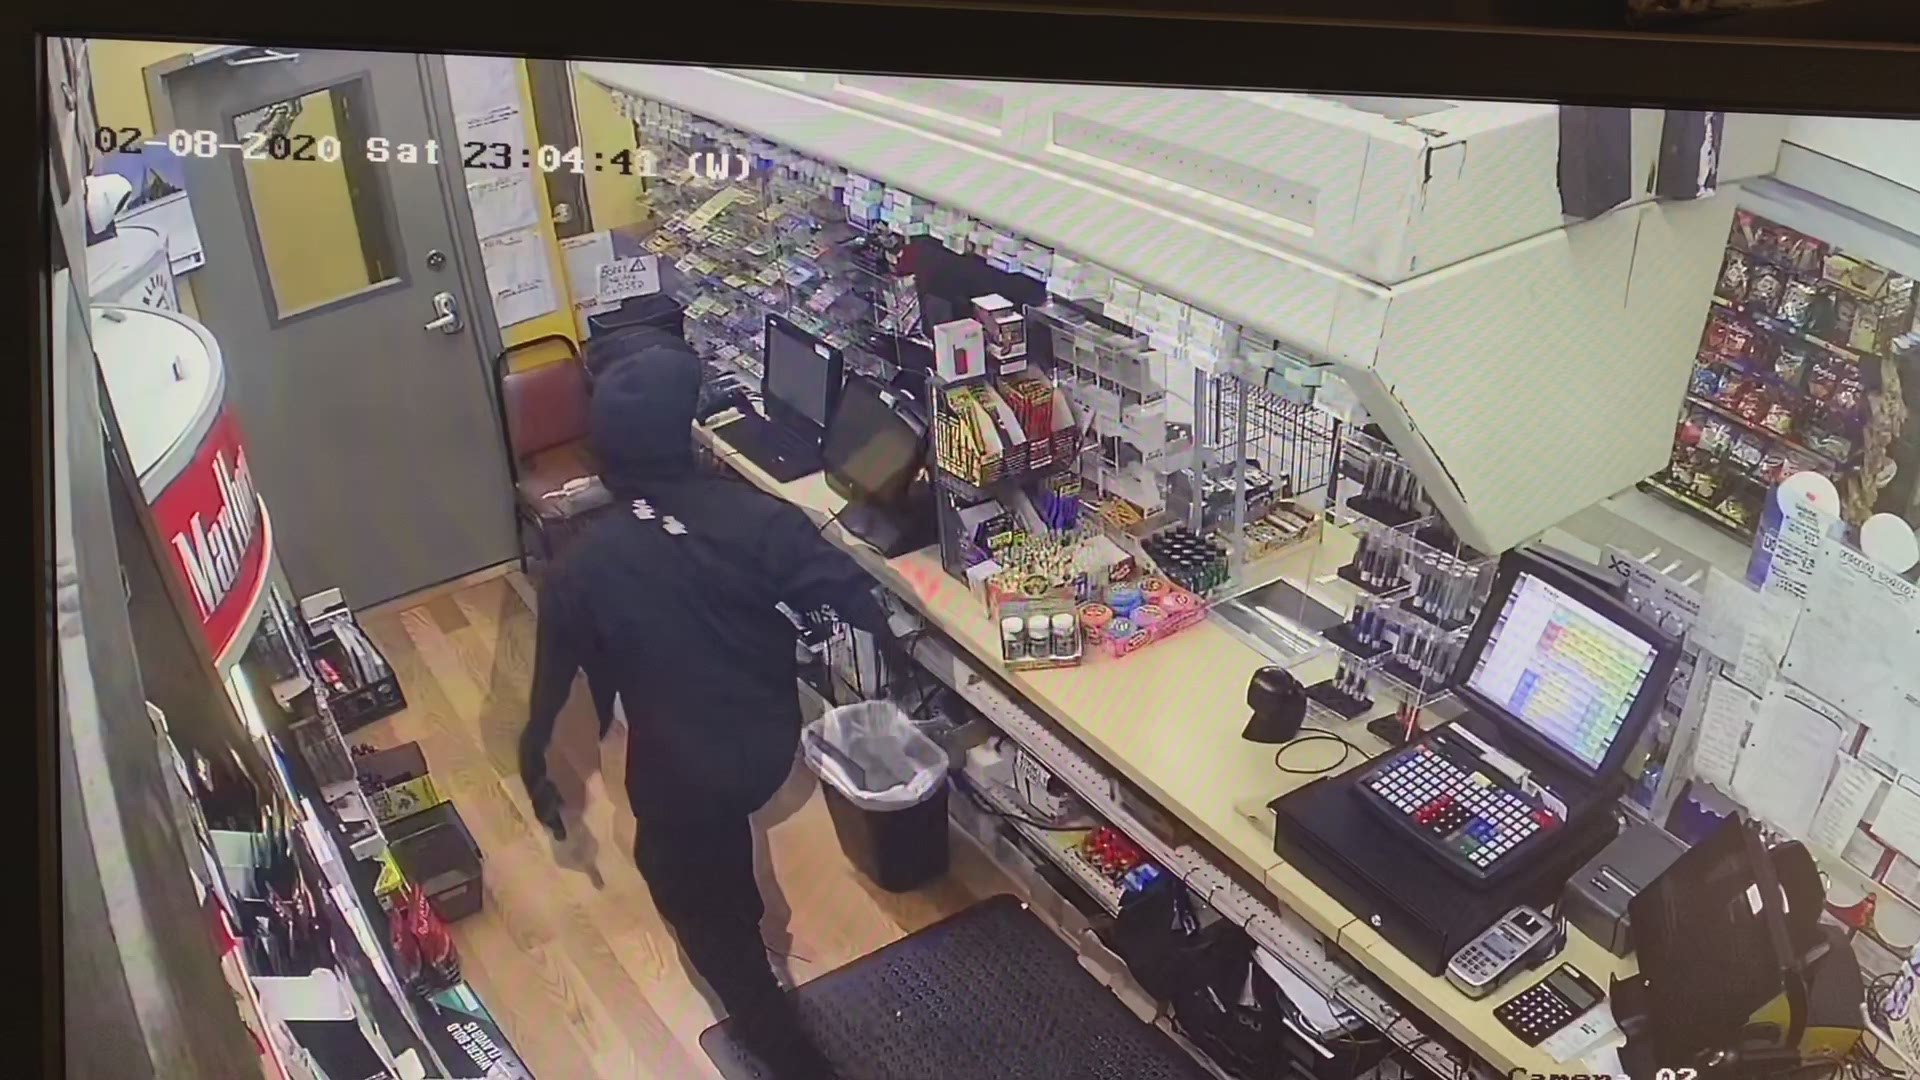 Gwinnett County Police release surveillance video of the two suspects involved in a violent robbery.